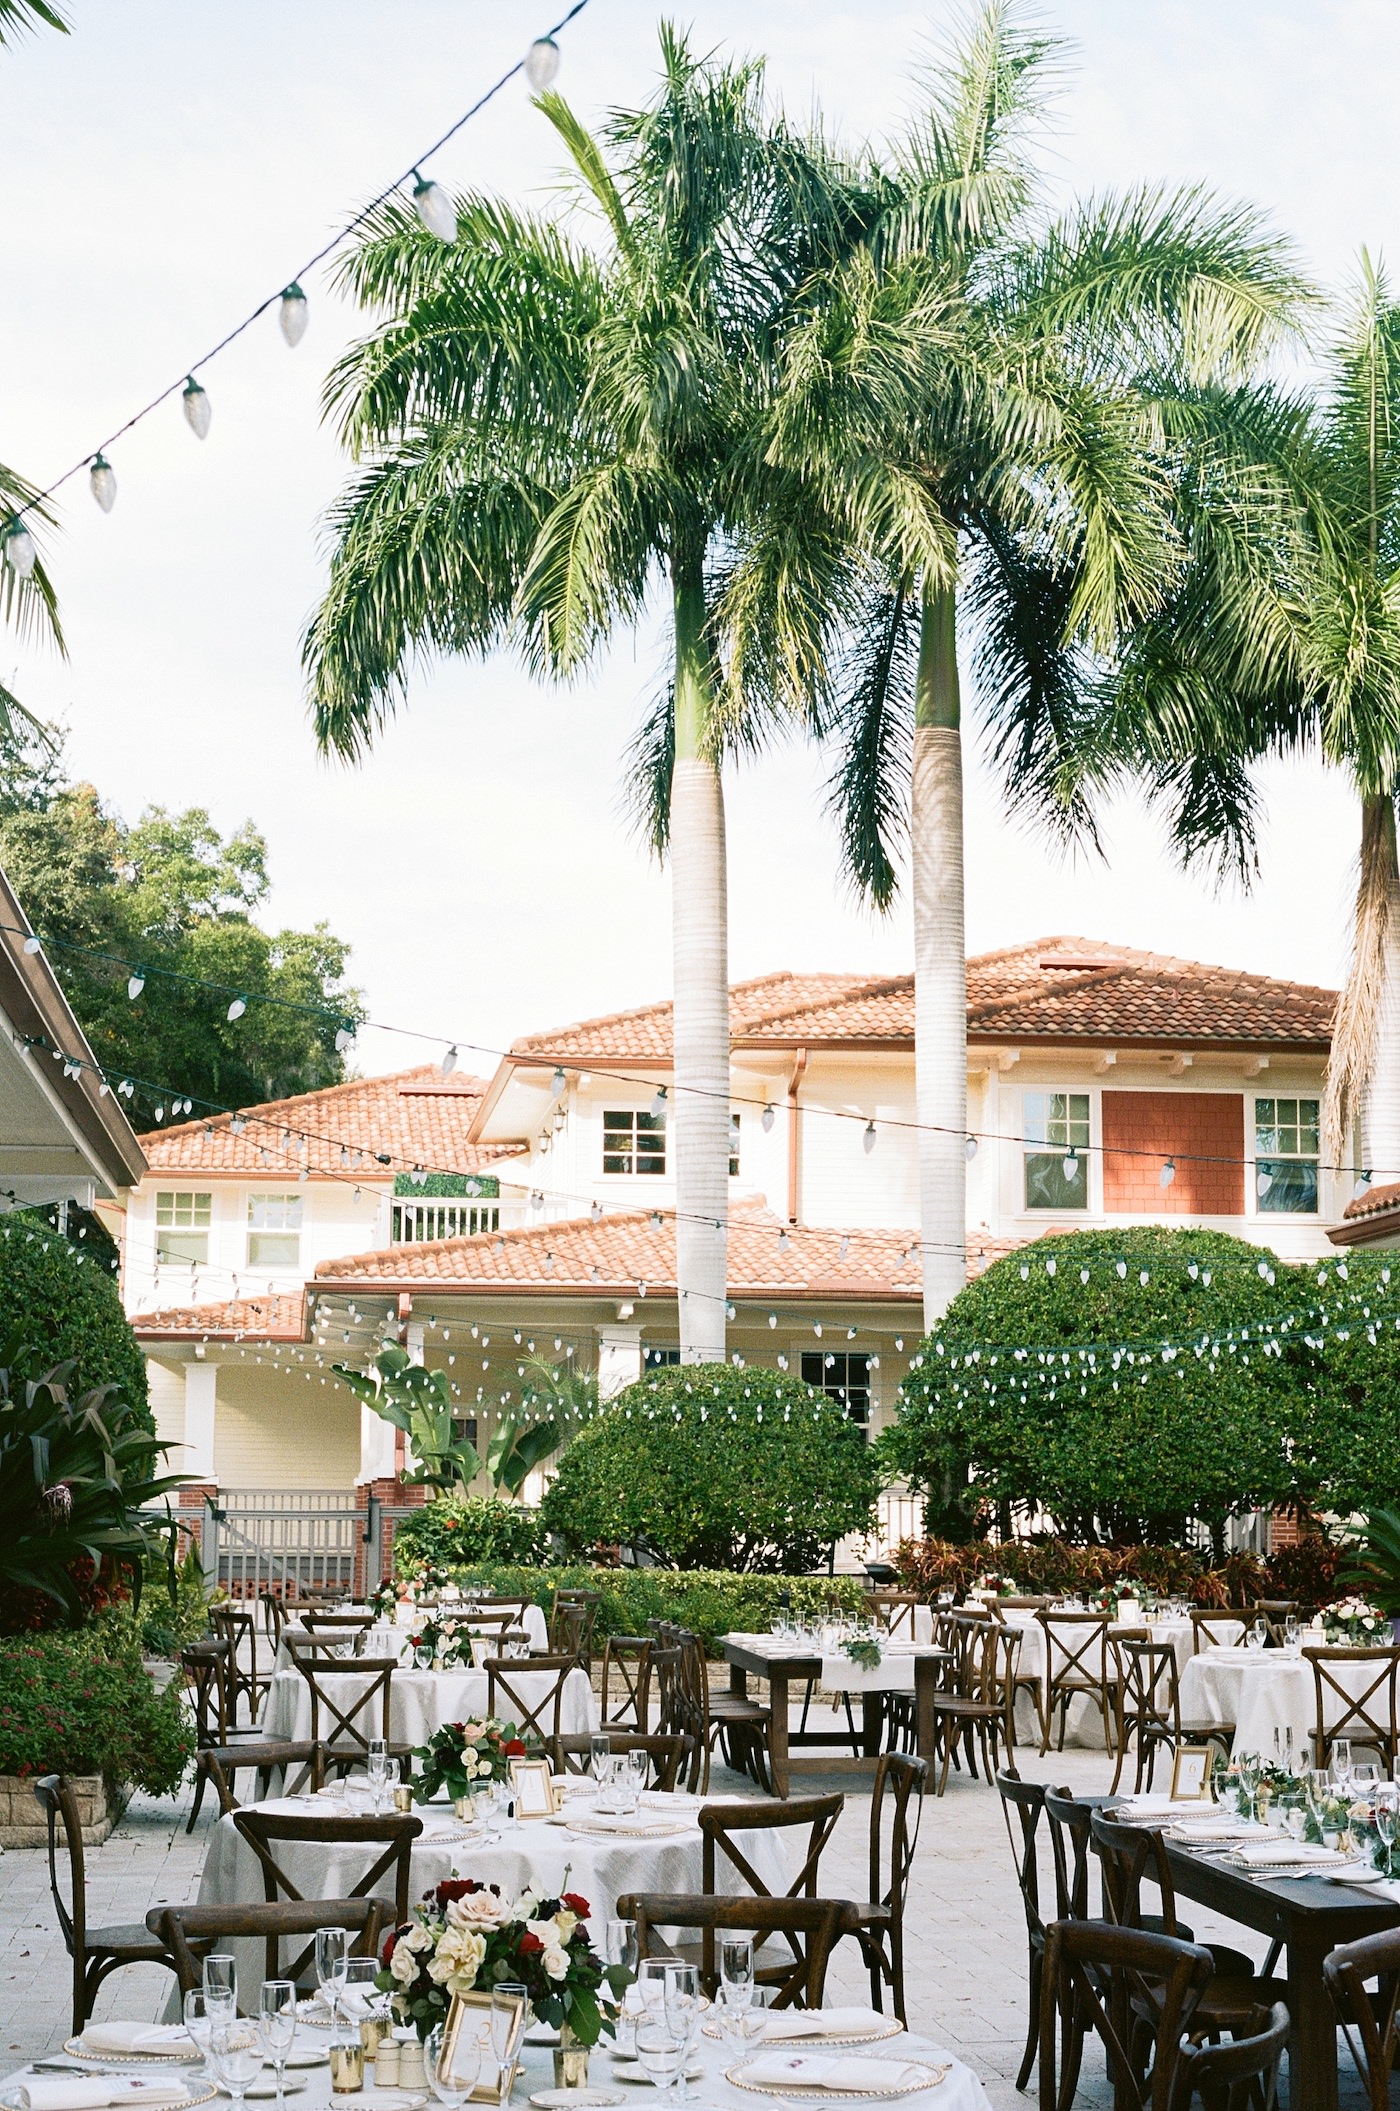 Florida Outdoor Wedding Reception with Canopy String Lights and Wood Cross Back French Country Chairs